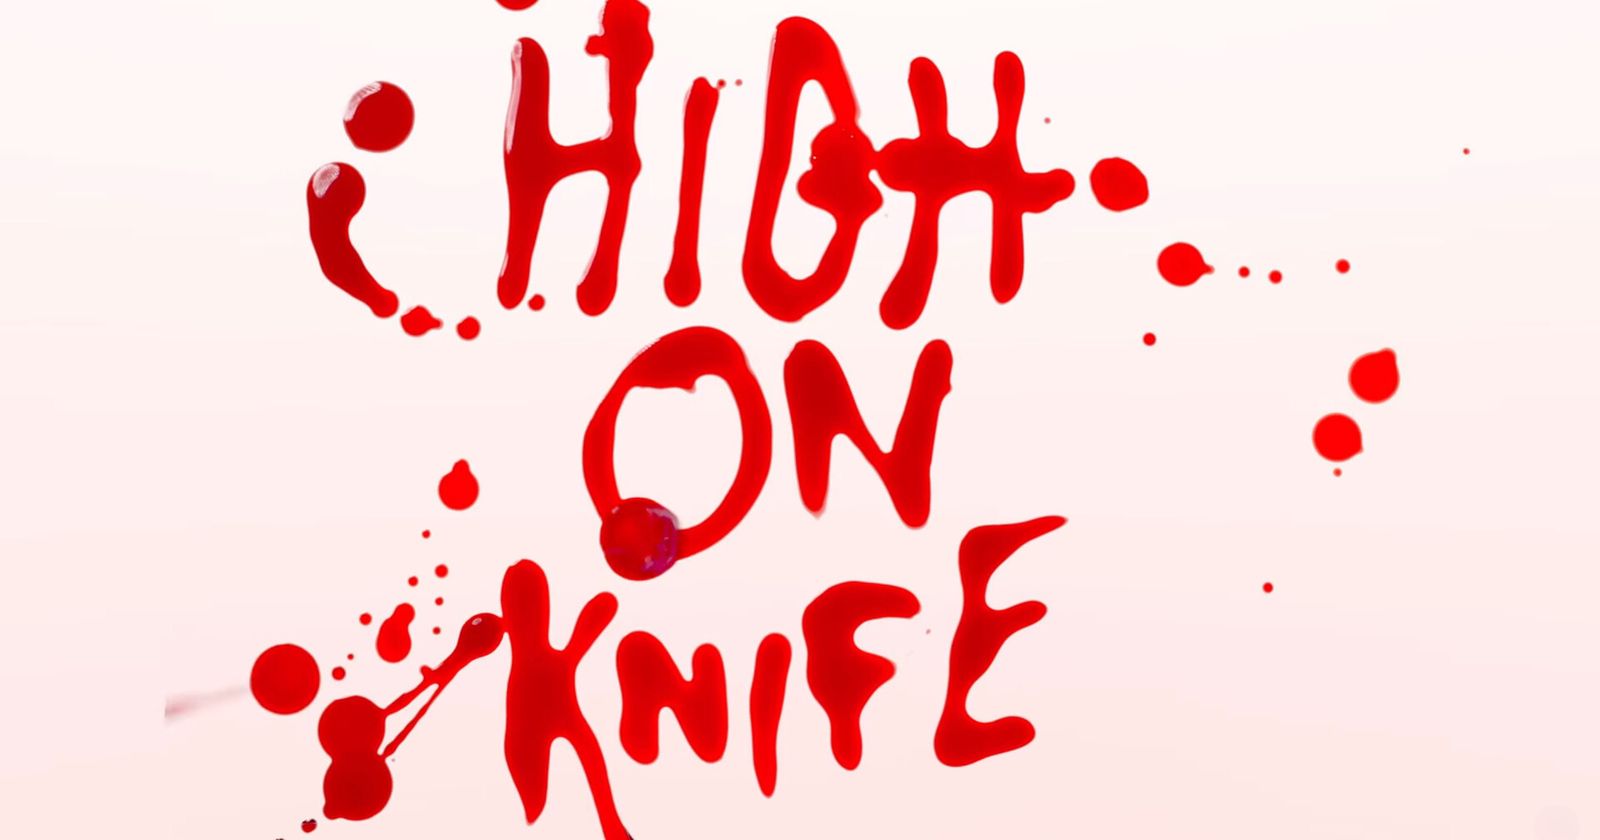 High on Life DLC High on Knife announced - Expected release date